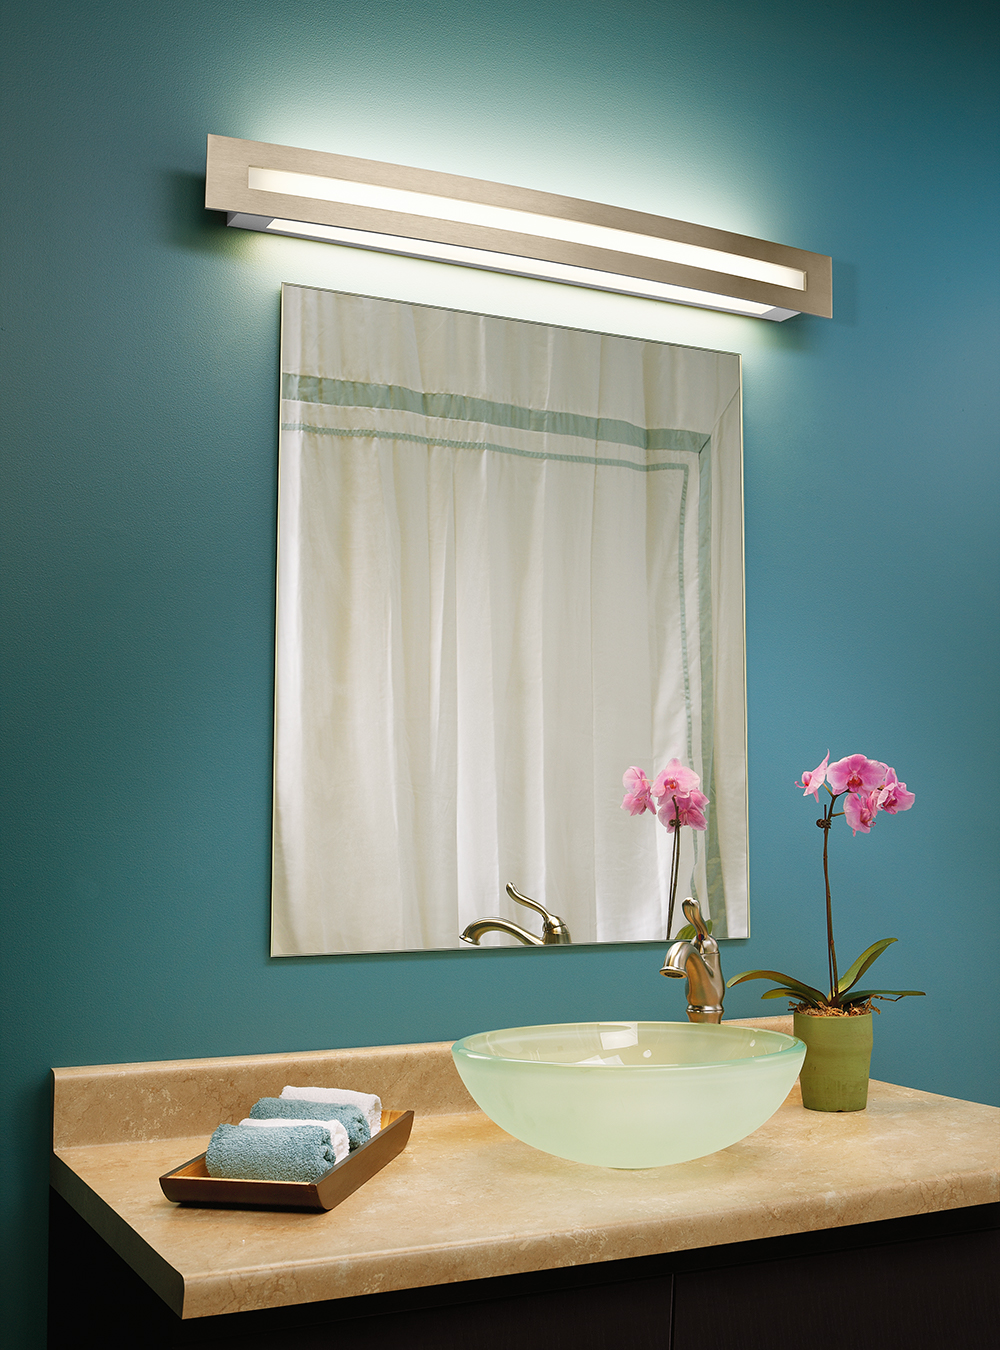 Blush modern vanity light above a simple bathroom mirror and a green wall